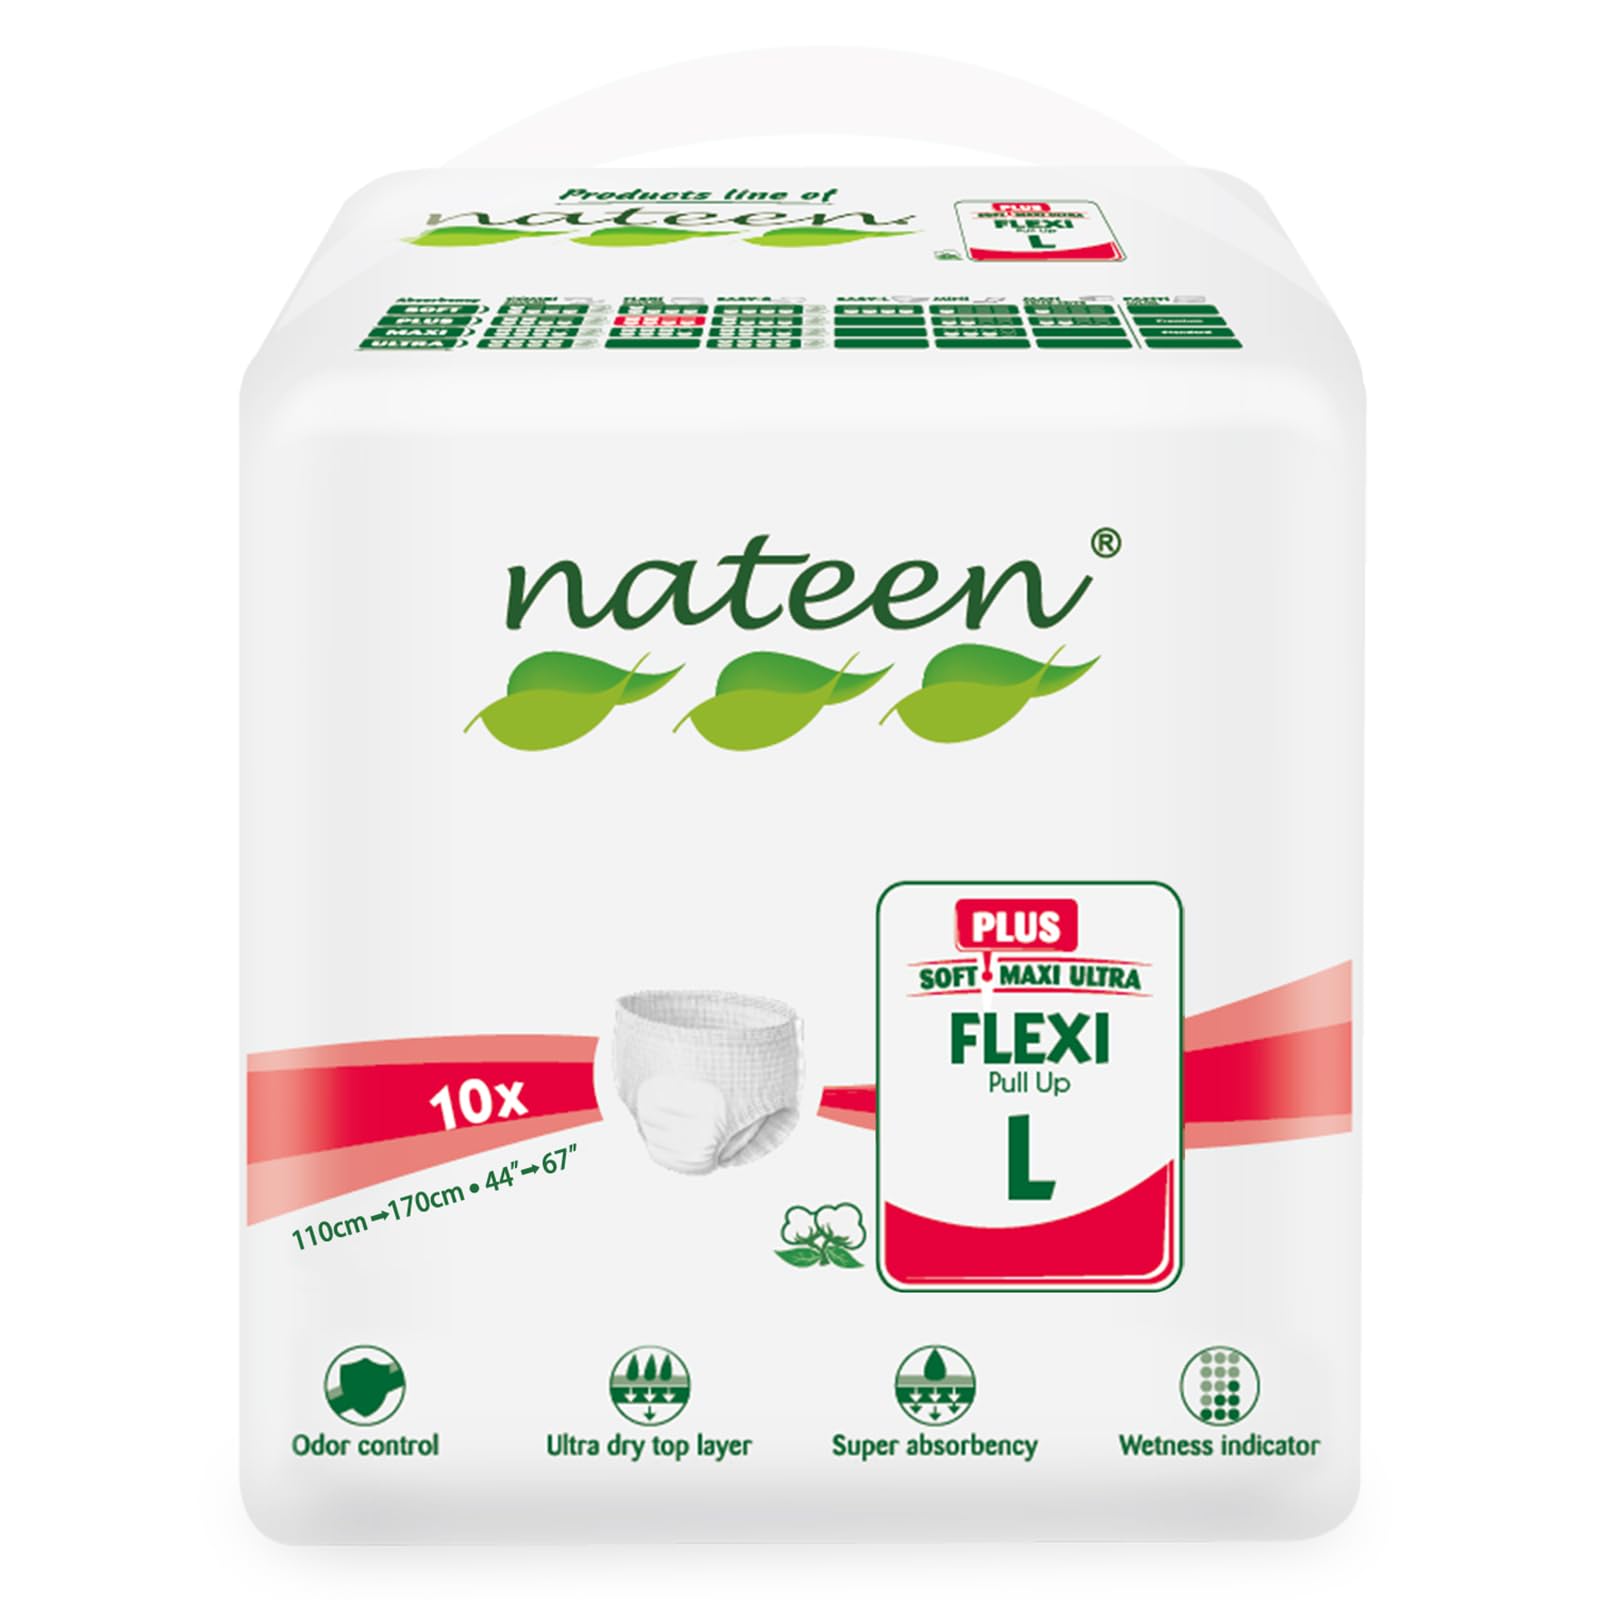 Nateen Flexi Plus Adult Diapers Pants,Incontinence Pull Up,Large,Waist Size 110-170cm,10 Count Adult Pull Ups,Superior Comfort,Excellent Combination o